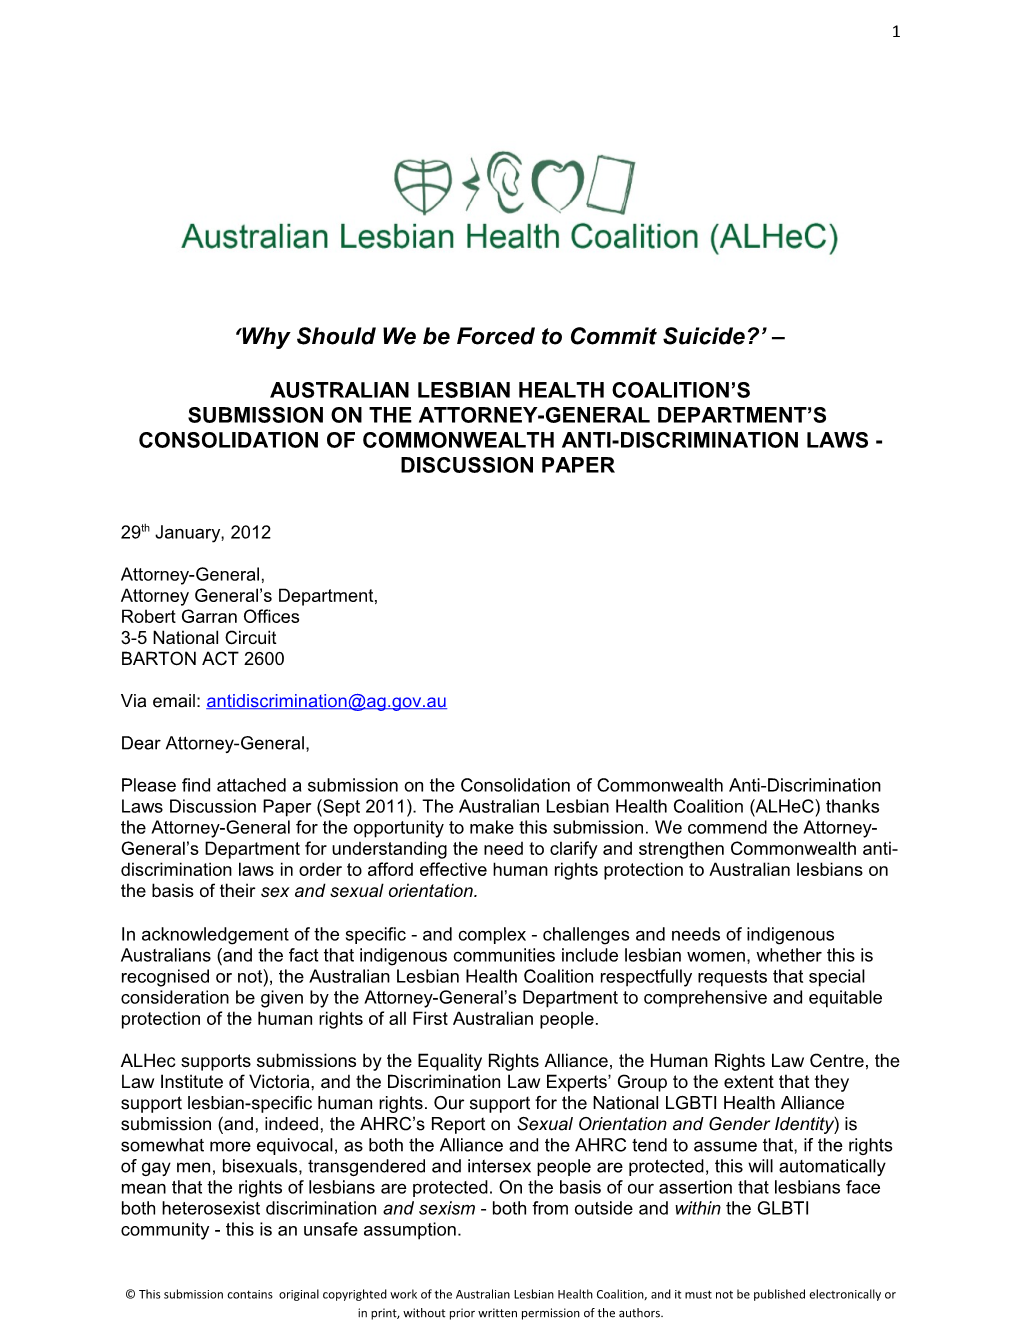 Submission on the Consolidation of Commonwealth Anti-Discrimination Laws - Australian Lesbian